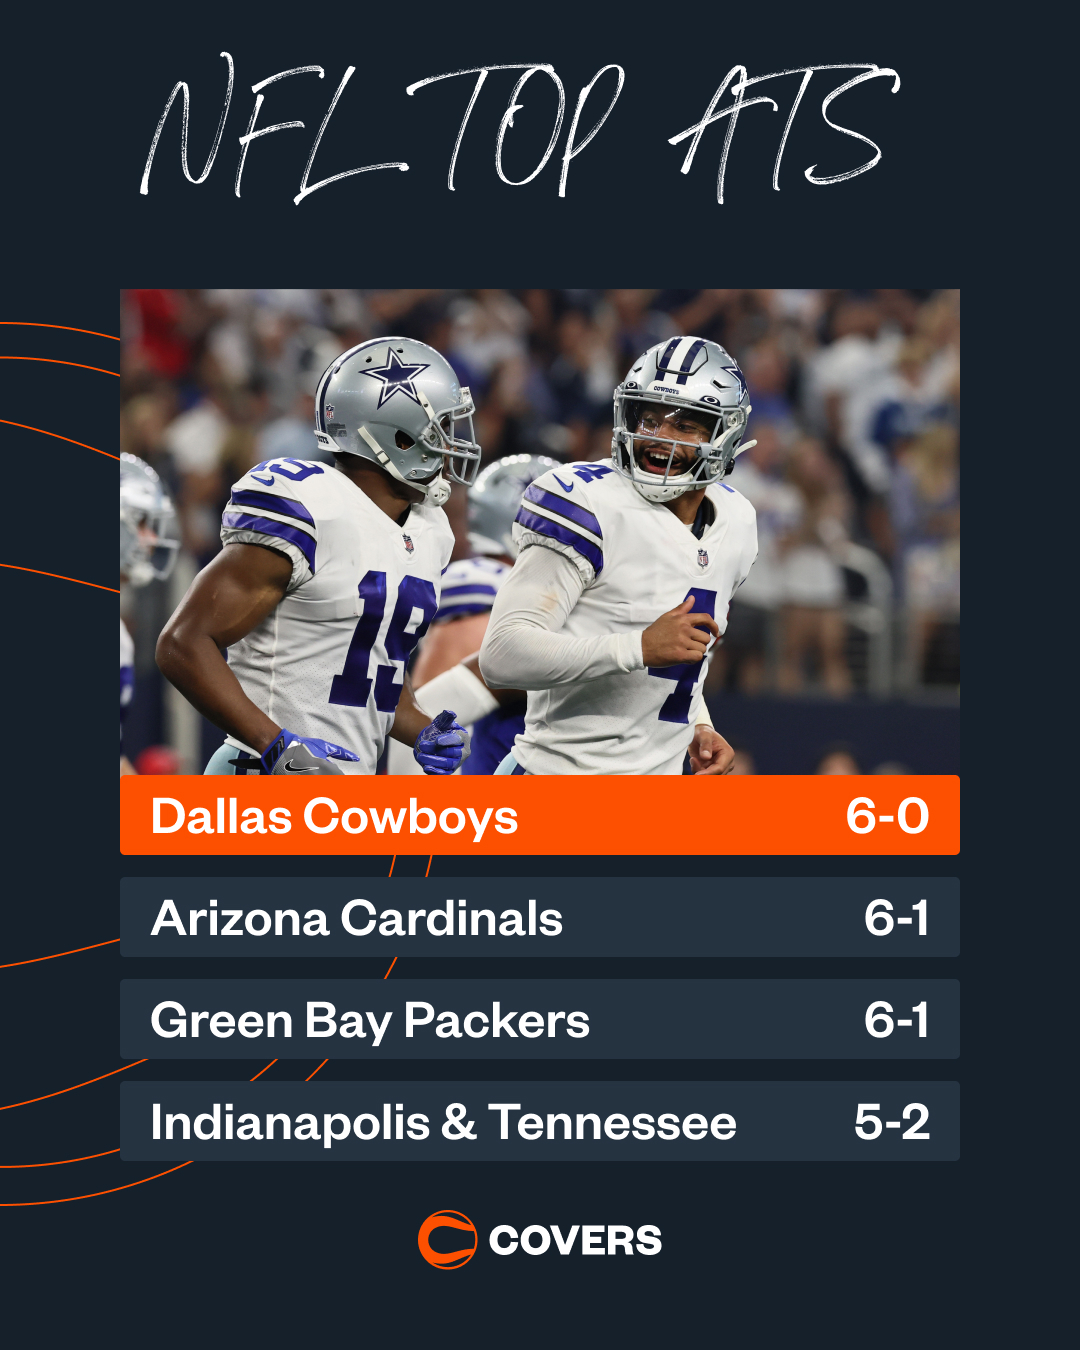 Covers on Twitter: 'The Dallas Cowboys are the best team against